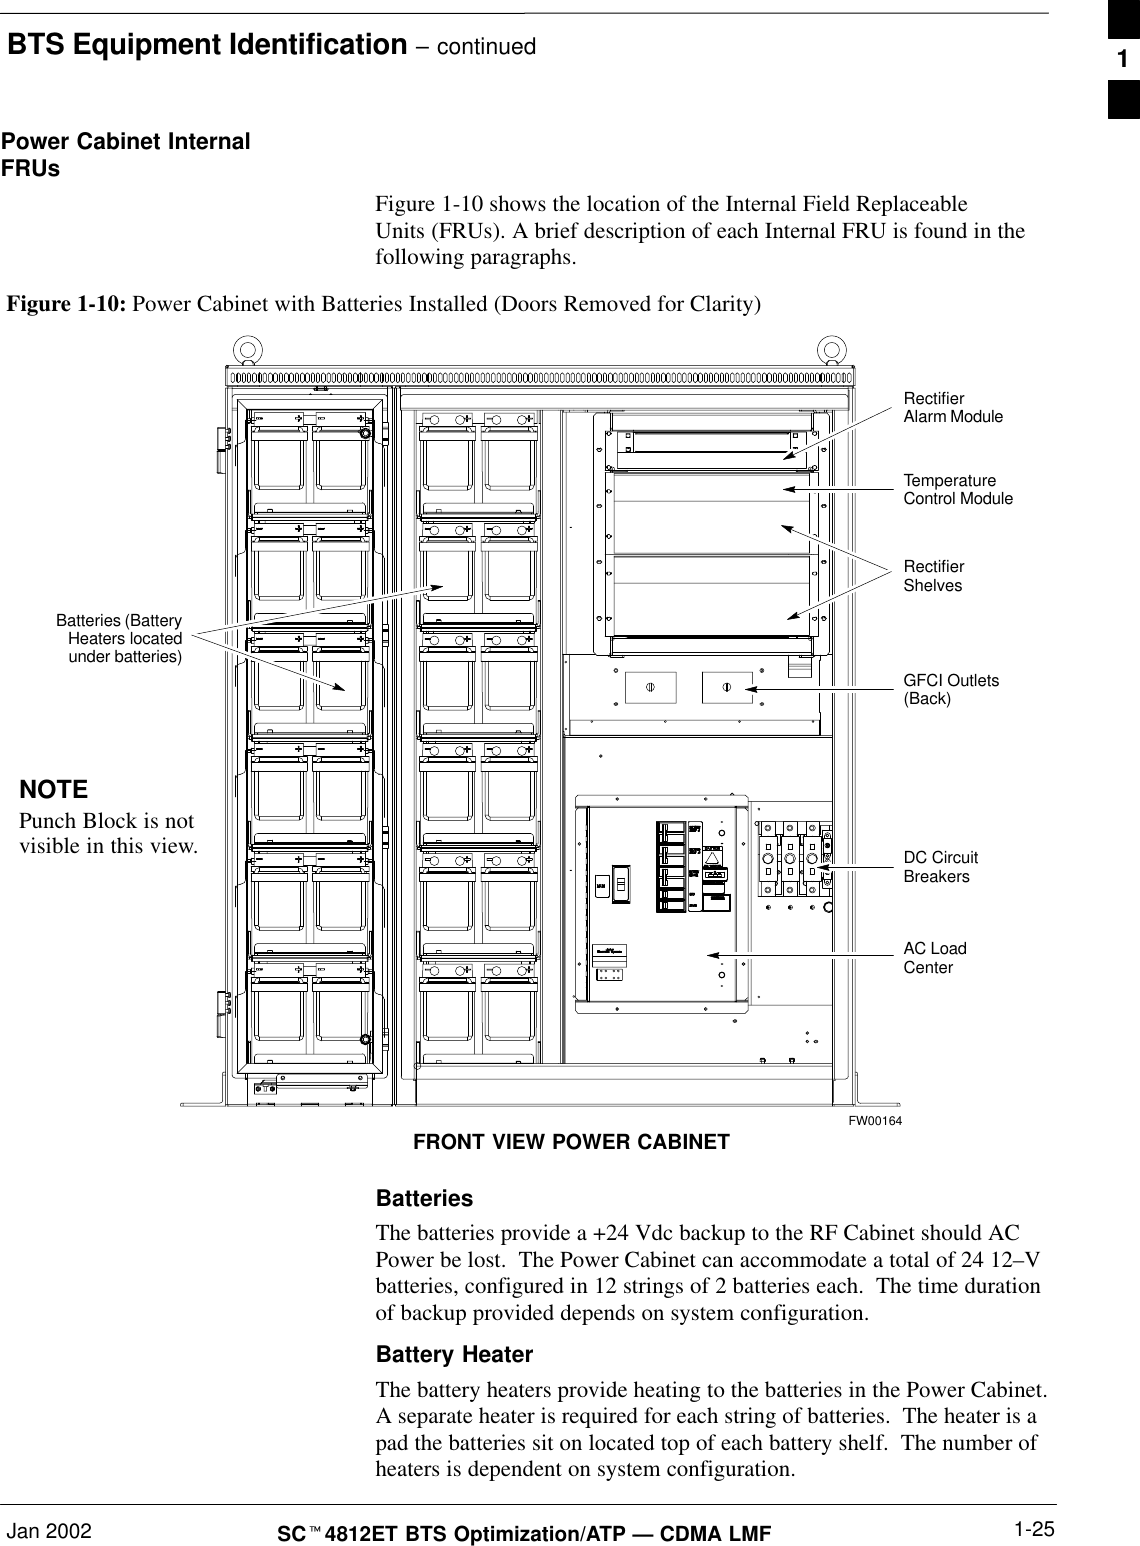 BTS Equipment Identification – continuedJan 2002 1-25SCt4812ET BTS Optimization/ATP — CDMA LMFPower Cabinet InternalFRUsFigure 1-10 shows the location of the Internal Field ReplaceableUnits (FRUs). A brief description of each Internal FRU is found in thefollowing paragraphs.Figure 1-10: Power Cabinet with Batteries Installed (Doors Removed for Clarity)NOTEPunch Block is notvisible in this view.RectifierShelvesRectifierAlarm ModuleDC CircuitBreakersAC LoadCenterGFCI Outlets(Back)TemperatureControl ModuleFRONT VIEW POWER CABINETBatteries (BatteryHeaters locatedunder batteries)FW00164BatteriesThe batteries provide a +24 Vdc backup to the RF Cabinet should ACPower be lost.  The Power Cabinet can accommodate a total of 24 12–Vbatteries, configured in 12 strings of 2 batteries each.  The time durationof backup provided depends on system configuration.Battery HeaterThe battery heaters provide heating to the batteries in the Power Cabinet.A separate heater is required for each string of batteries.  The heater is apad the batteries sit on located top of each battery shelf.  The number ofheaters is dependent on system configuration.1